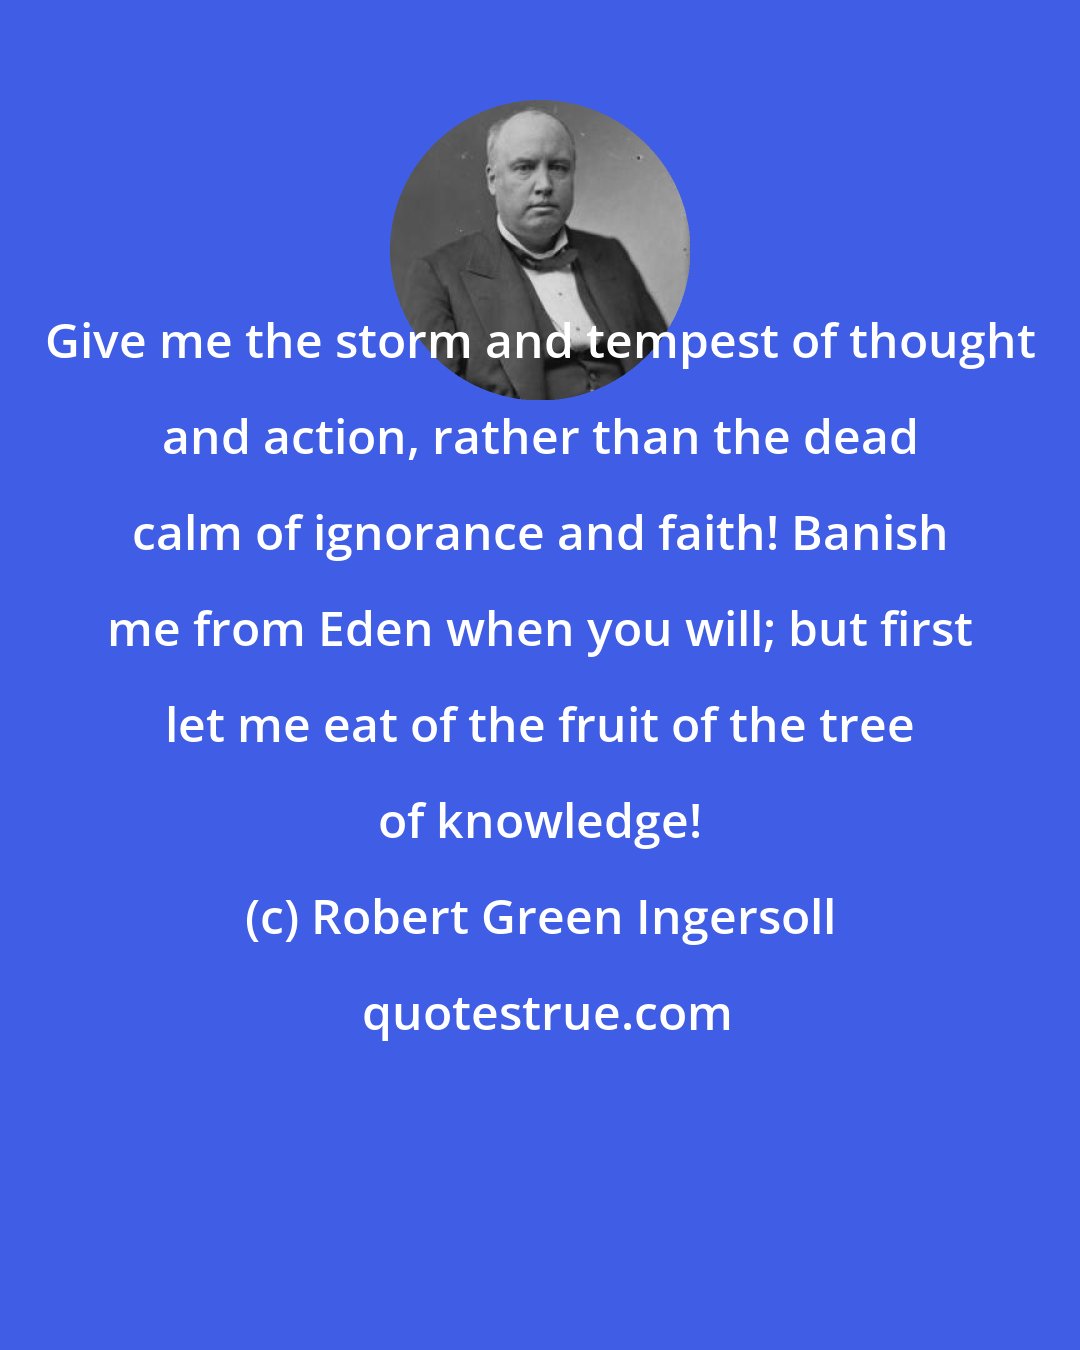 Robert Green Ingersoll: Give me the storm and tempest of thought and action, rather than the dead calm of ignorance and faith! Banish me from Eden when you will; but first let me eat of the fruit of the tree of knowledge!